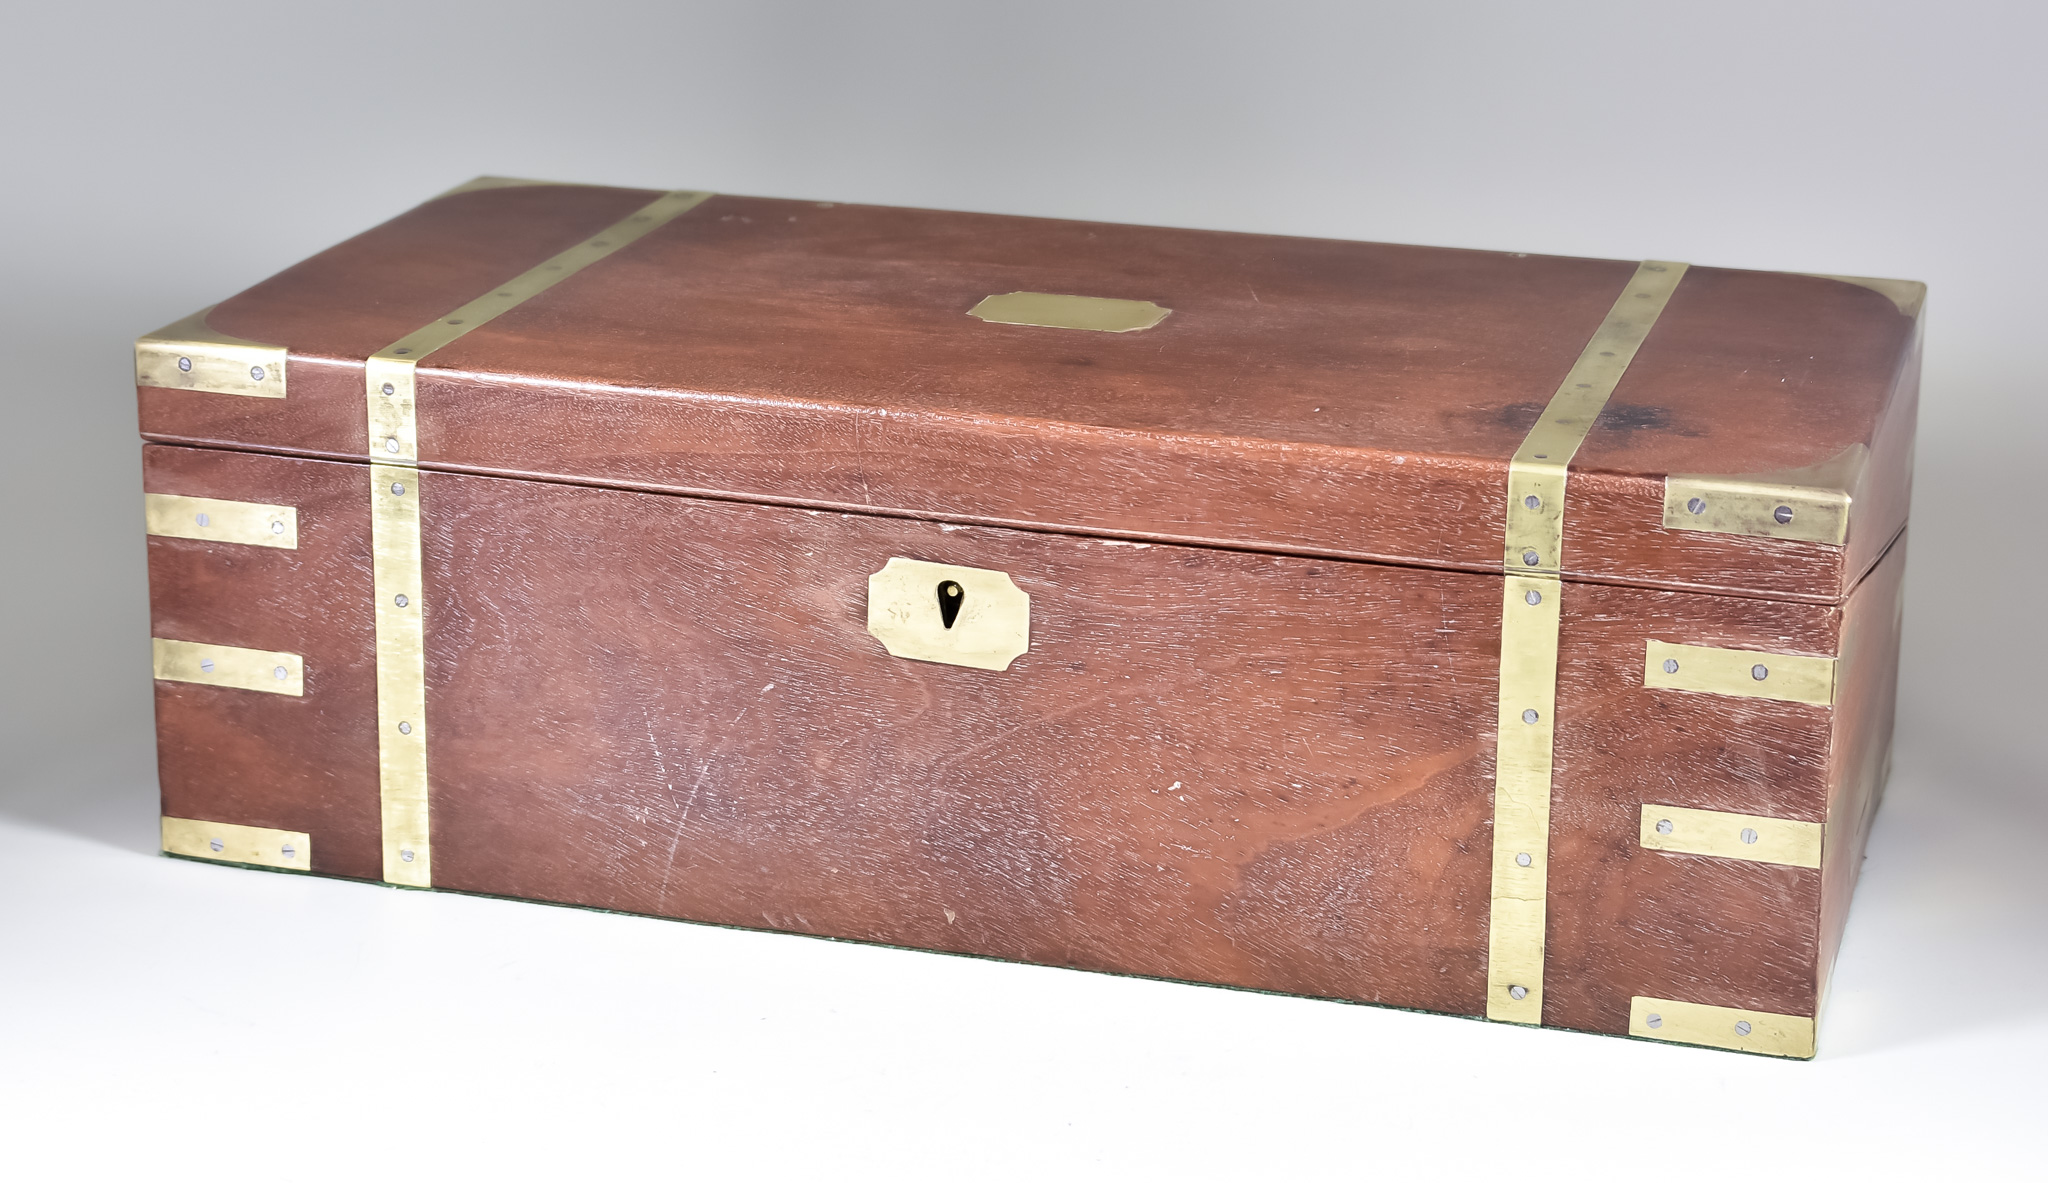 A Mahogany and Brass Bound Rectangular Writing Box, 19th Century, with fitted interior and drawer to